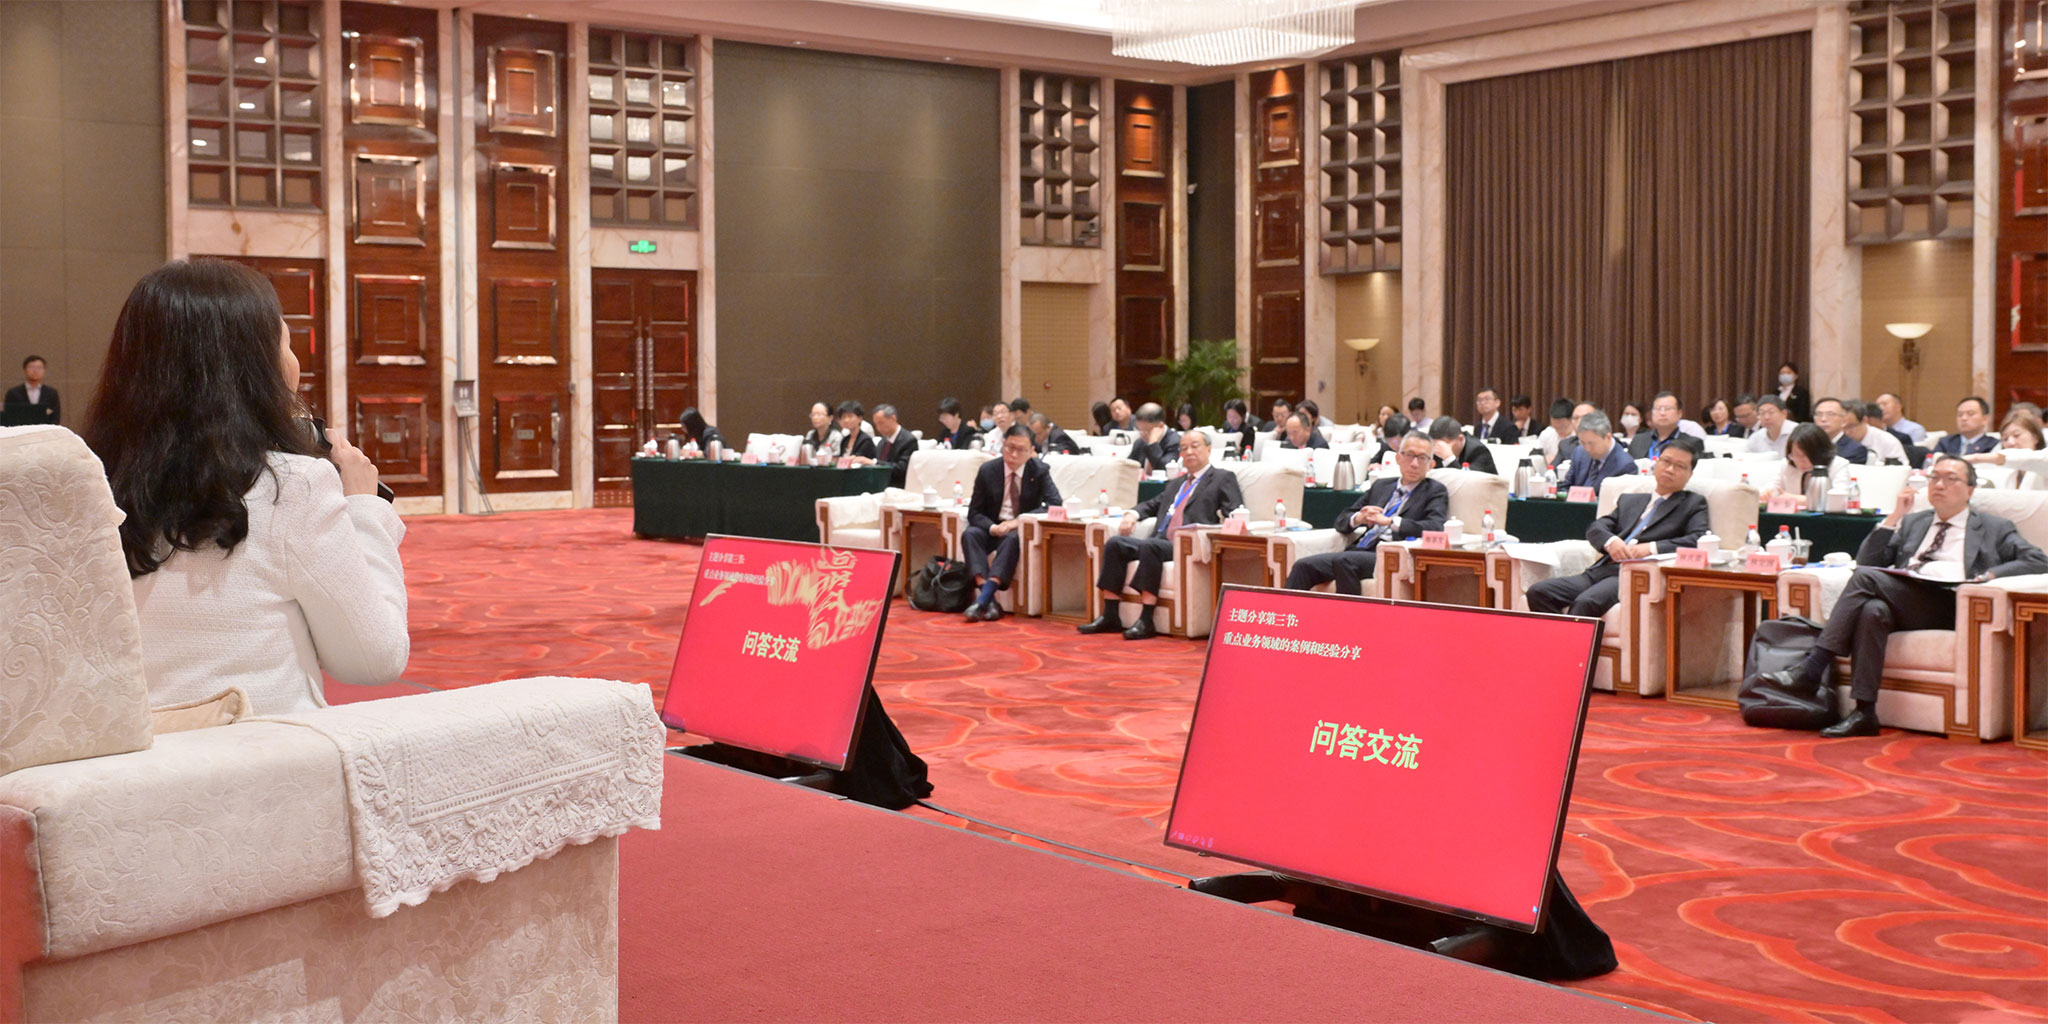 The second seminar on the legal challenges and coping strategies under the Belt and Road Initiative organised by the State-owned Assets Supervision and Administration Commission of the State Council and co-organised by the Department of Treaty and Law of the Ministry of Commerce and the Department of Justice was held in Beijing today (August 25). Photo shows renowned speakers and participants exchanging views at a question-and-answer session of the third sharing session of the seminar on using Hong Kong legal services to support enterprises in making foreign investments.